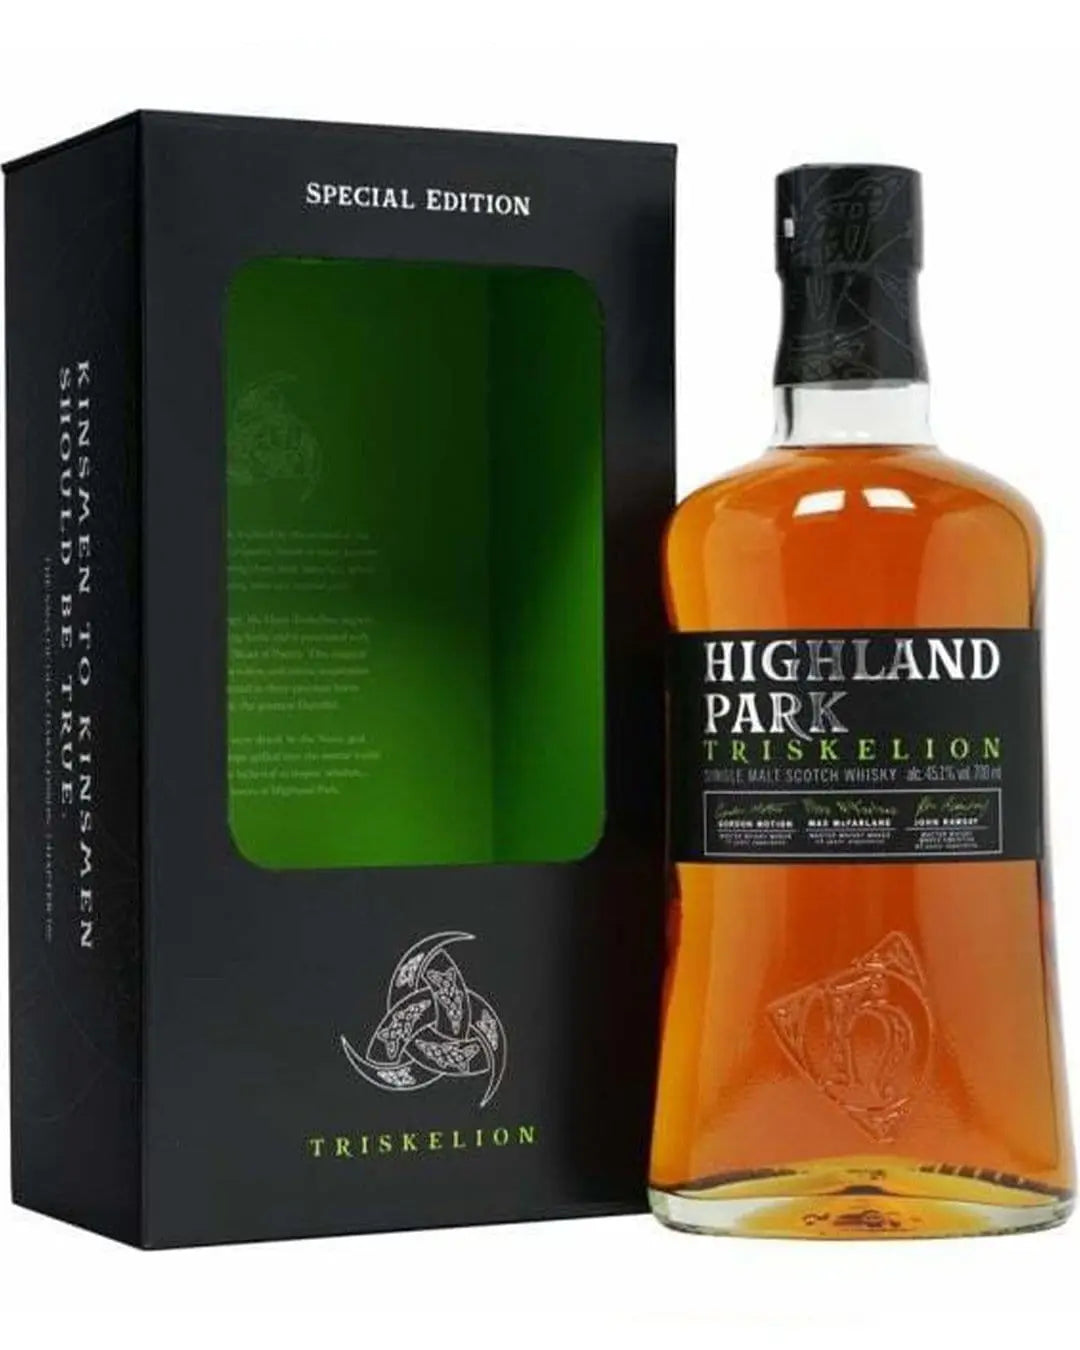 Highland Park Triskelion Special Edition Whisky, 70 cl Whisky 5010314309411